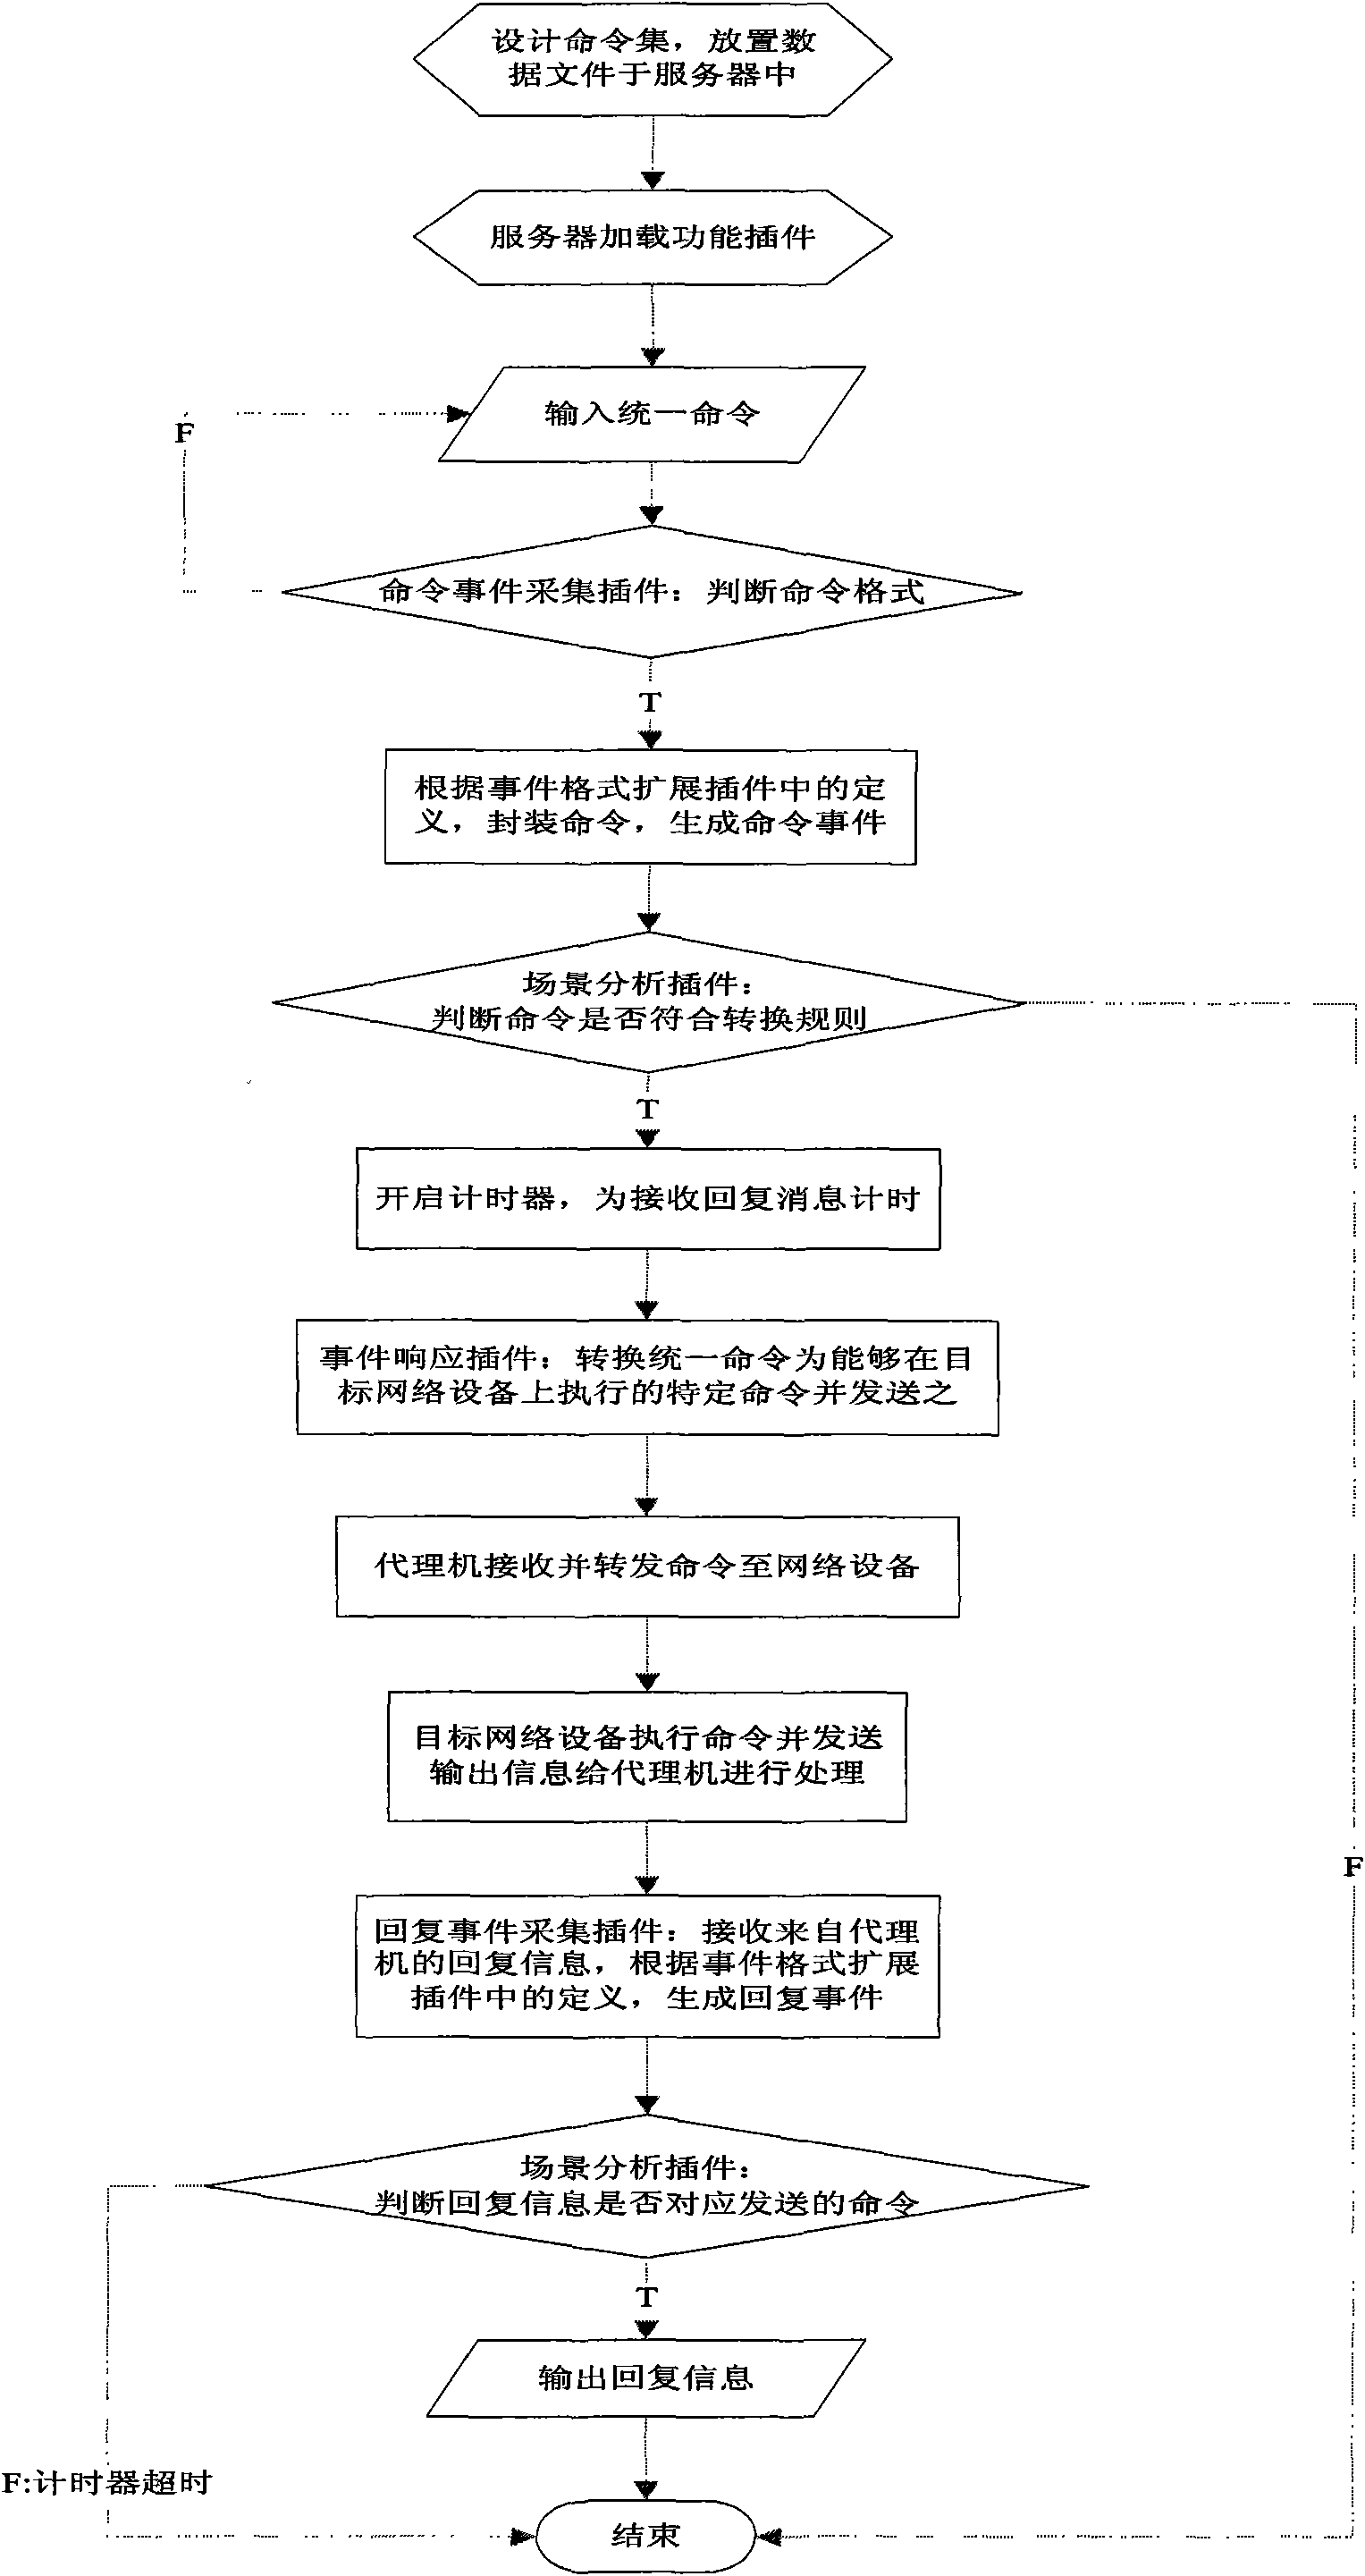 System and method for unified configuration of network equipment